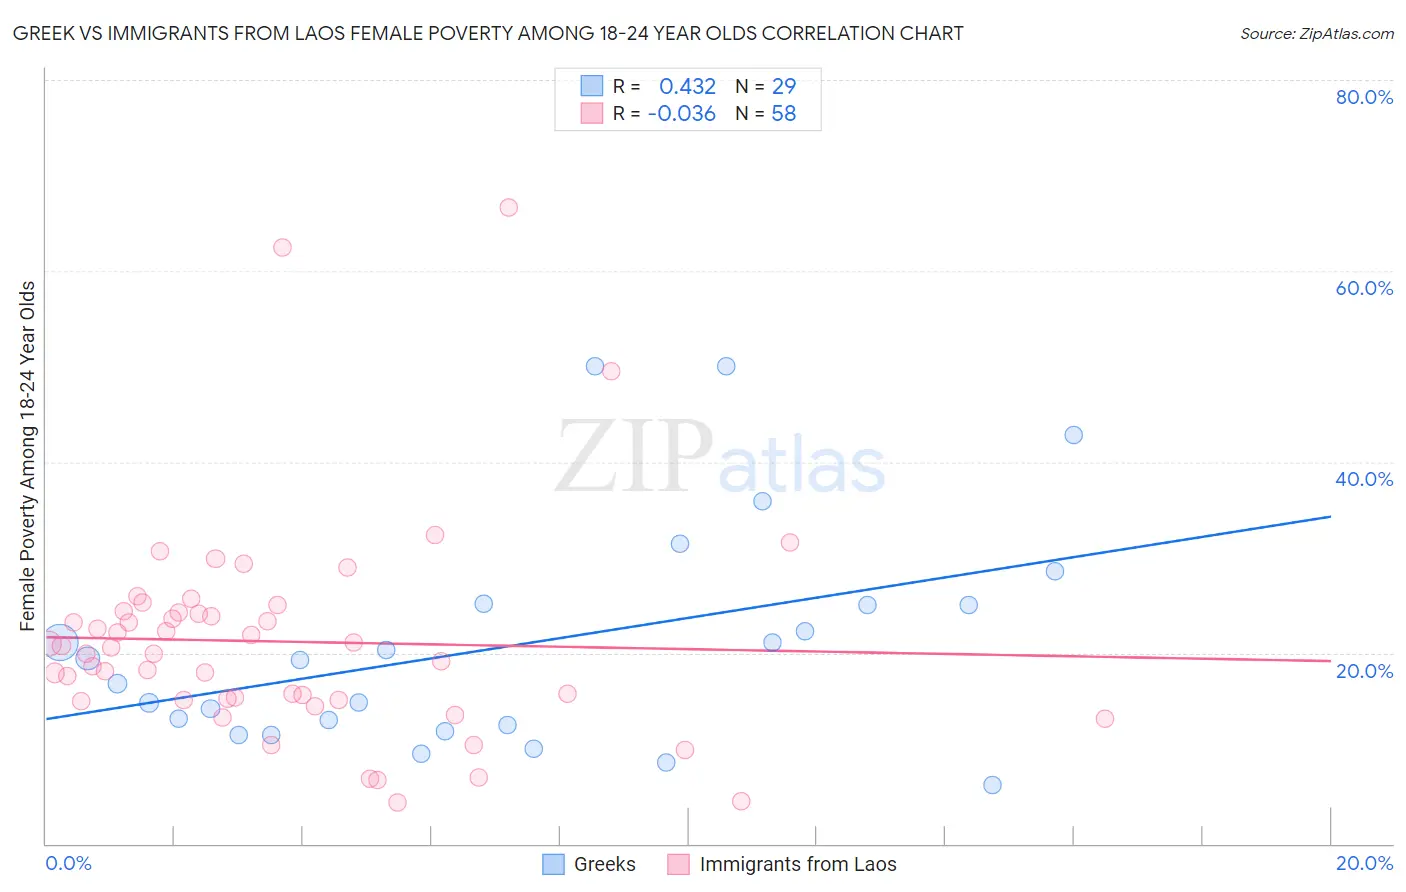 Greek vs Immigrants from Laos Female Poverty Among 18-24 Year Olds